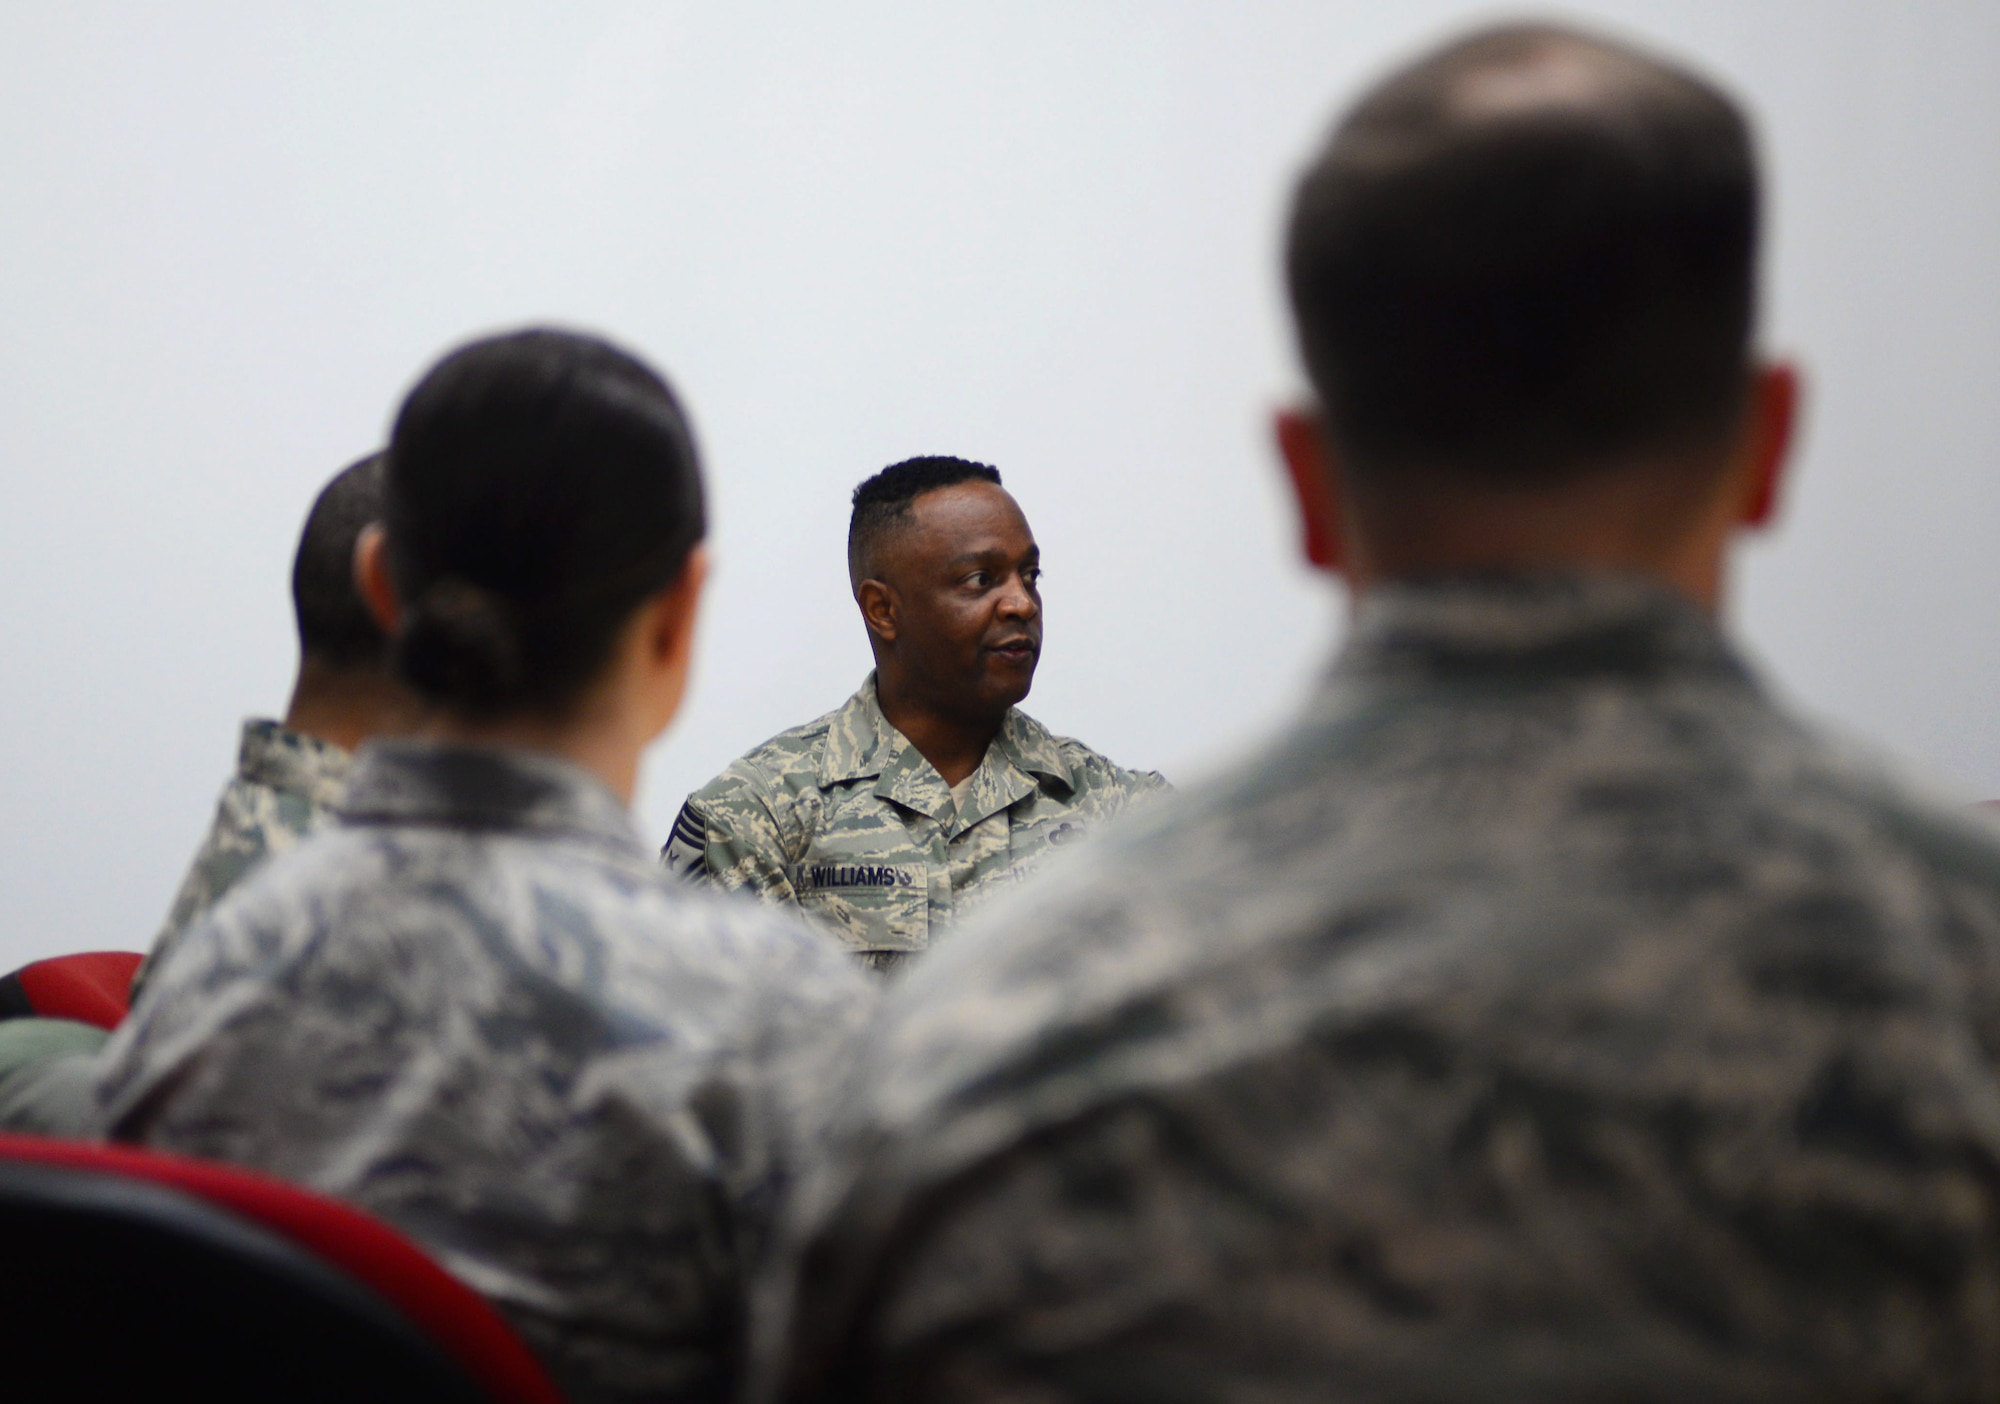 Chief Master Sgt. Calvin Williams, Air Force Global Strike Command command chief, speaks with members of the administrative career fields during a visit to Ellsworth Air Force Base, S.D., March 2, 2017. Williams listened to their concerns and answered questions during the session, providing useful advice on furthering their careers. (U.S. Air Force photo by Airman 1st Class Denise M. Jenson)